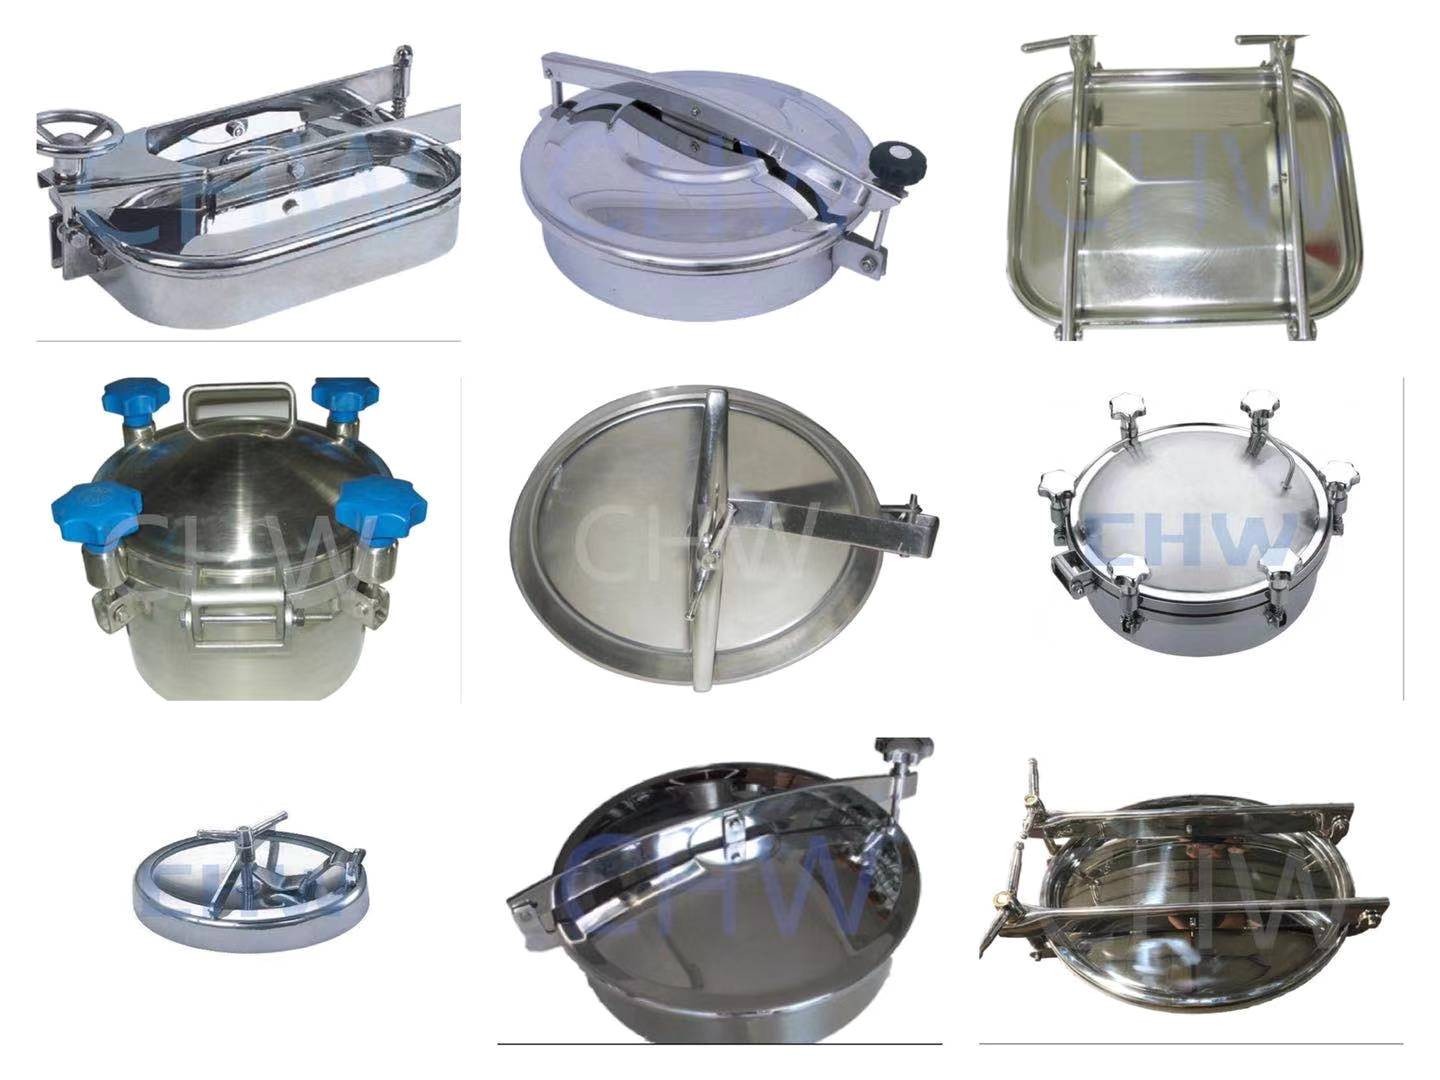 Sanitary stainless steel ss304 Pressure Elliptical Hatch Tank Manhole Cover manway